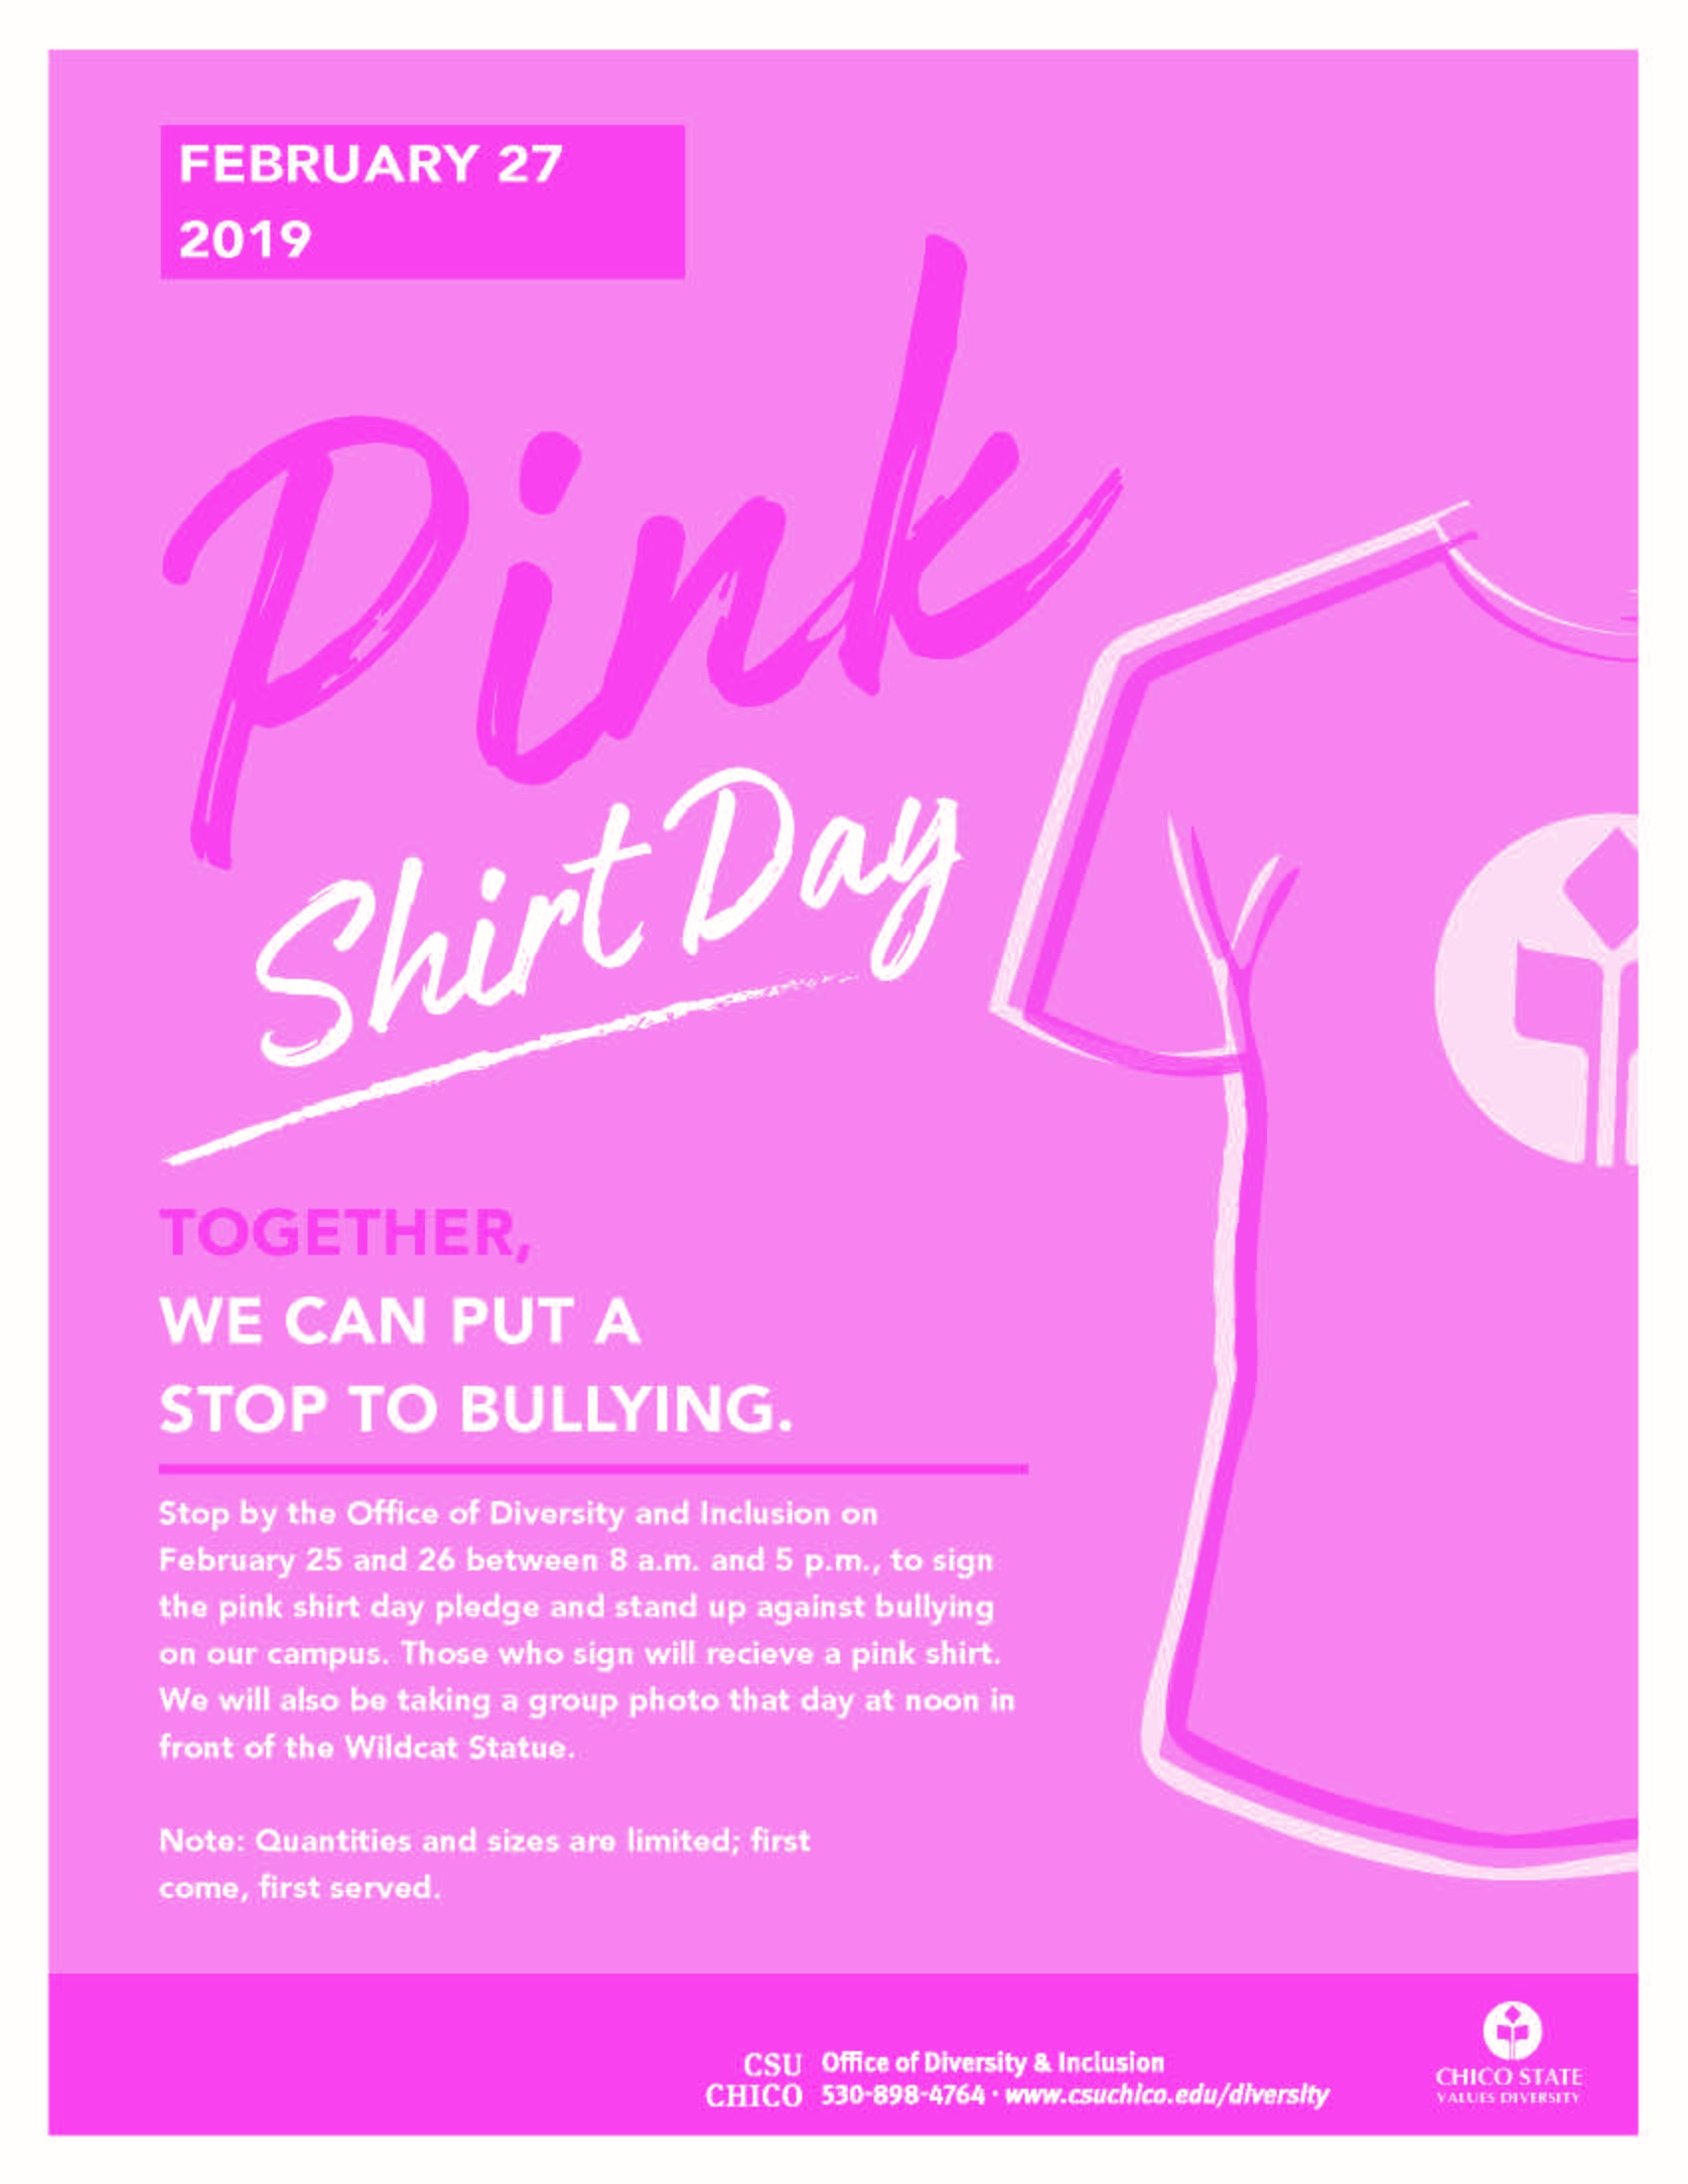 Pink Shirt Day February 27th. Together we can put a stop to bullying. Stop by the Office of Diversity February 25 & 26 at 8 a.m. and 5 p.m. to sign the pink shirt day pledge.